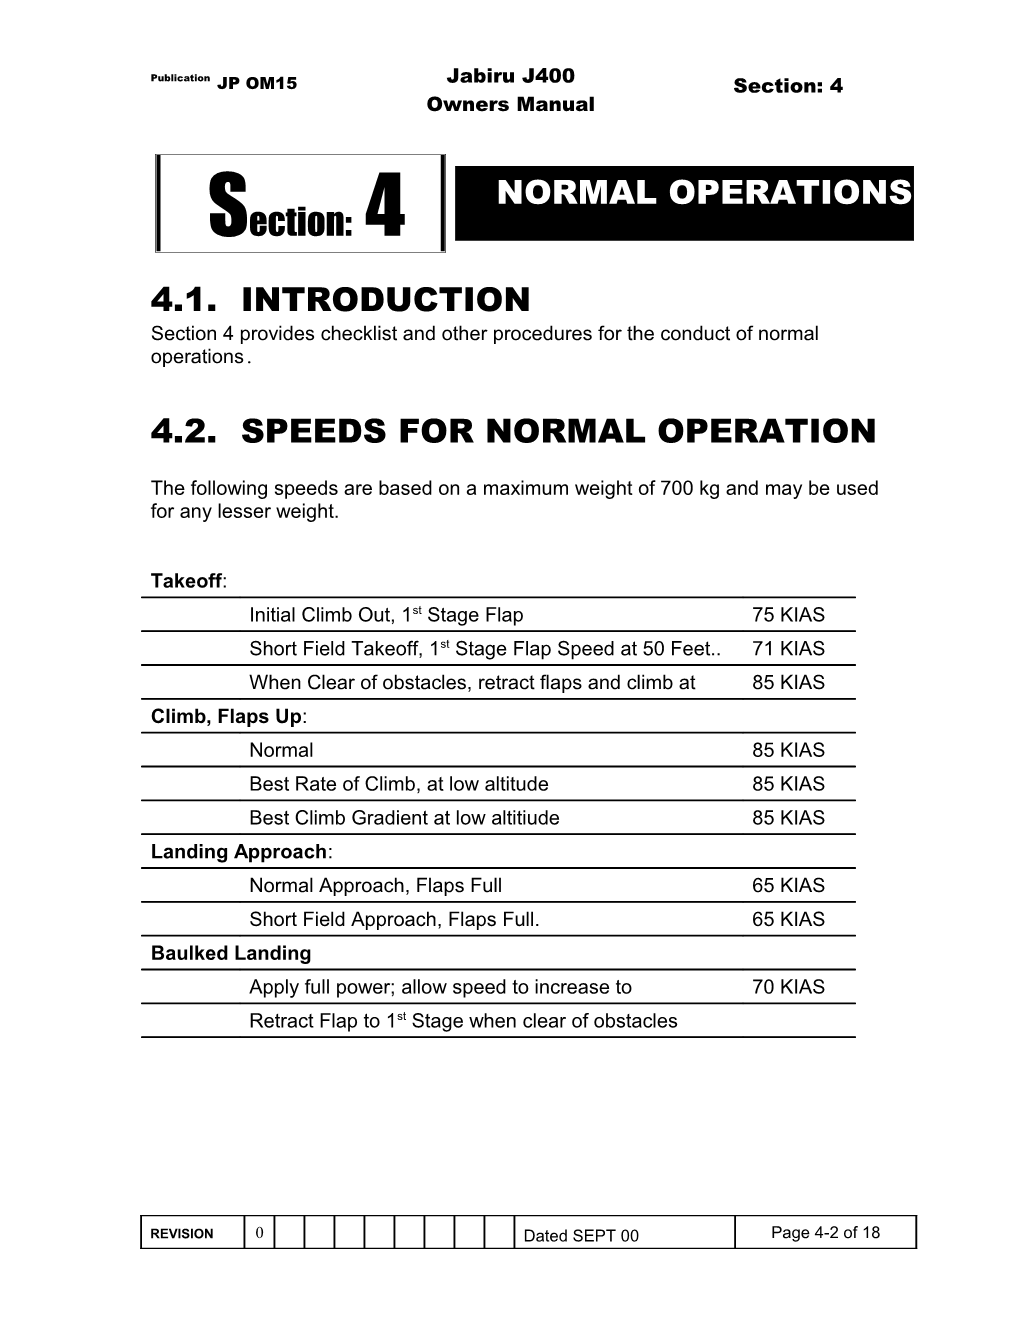 4.2. Speeds for Normal Operation